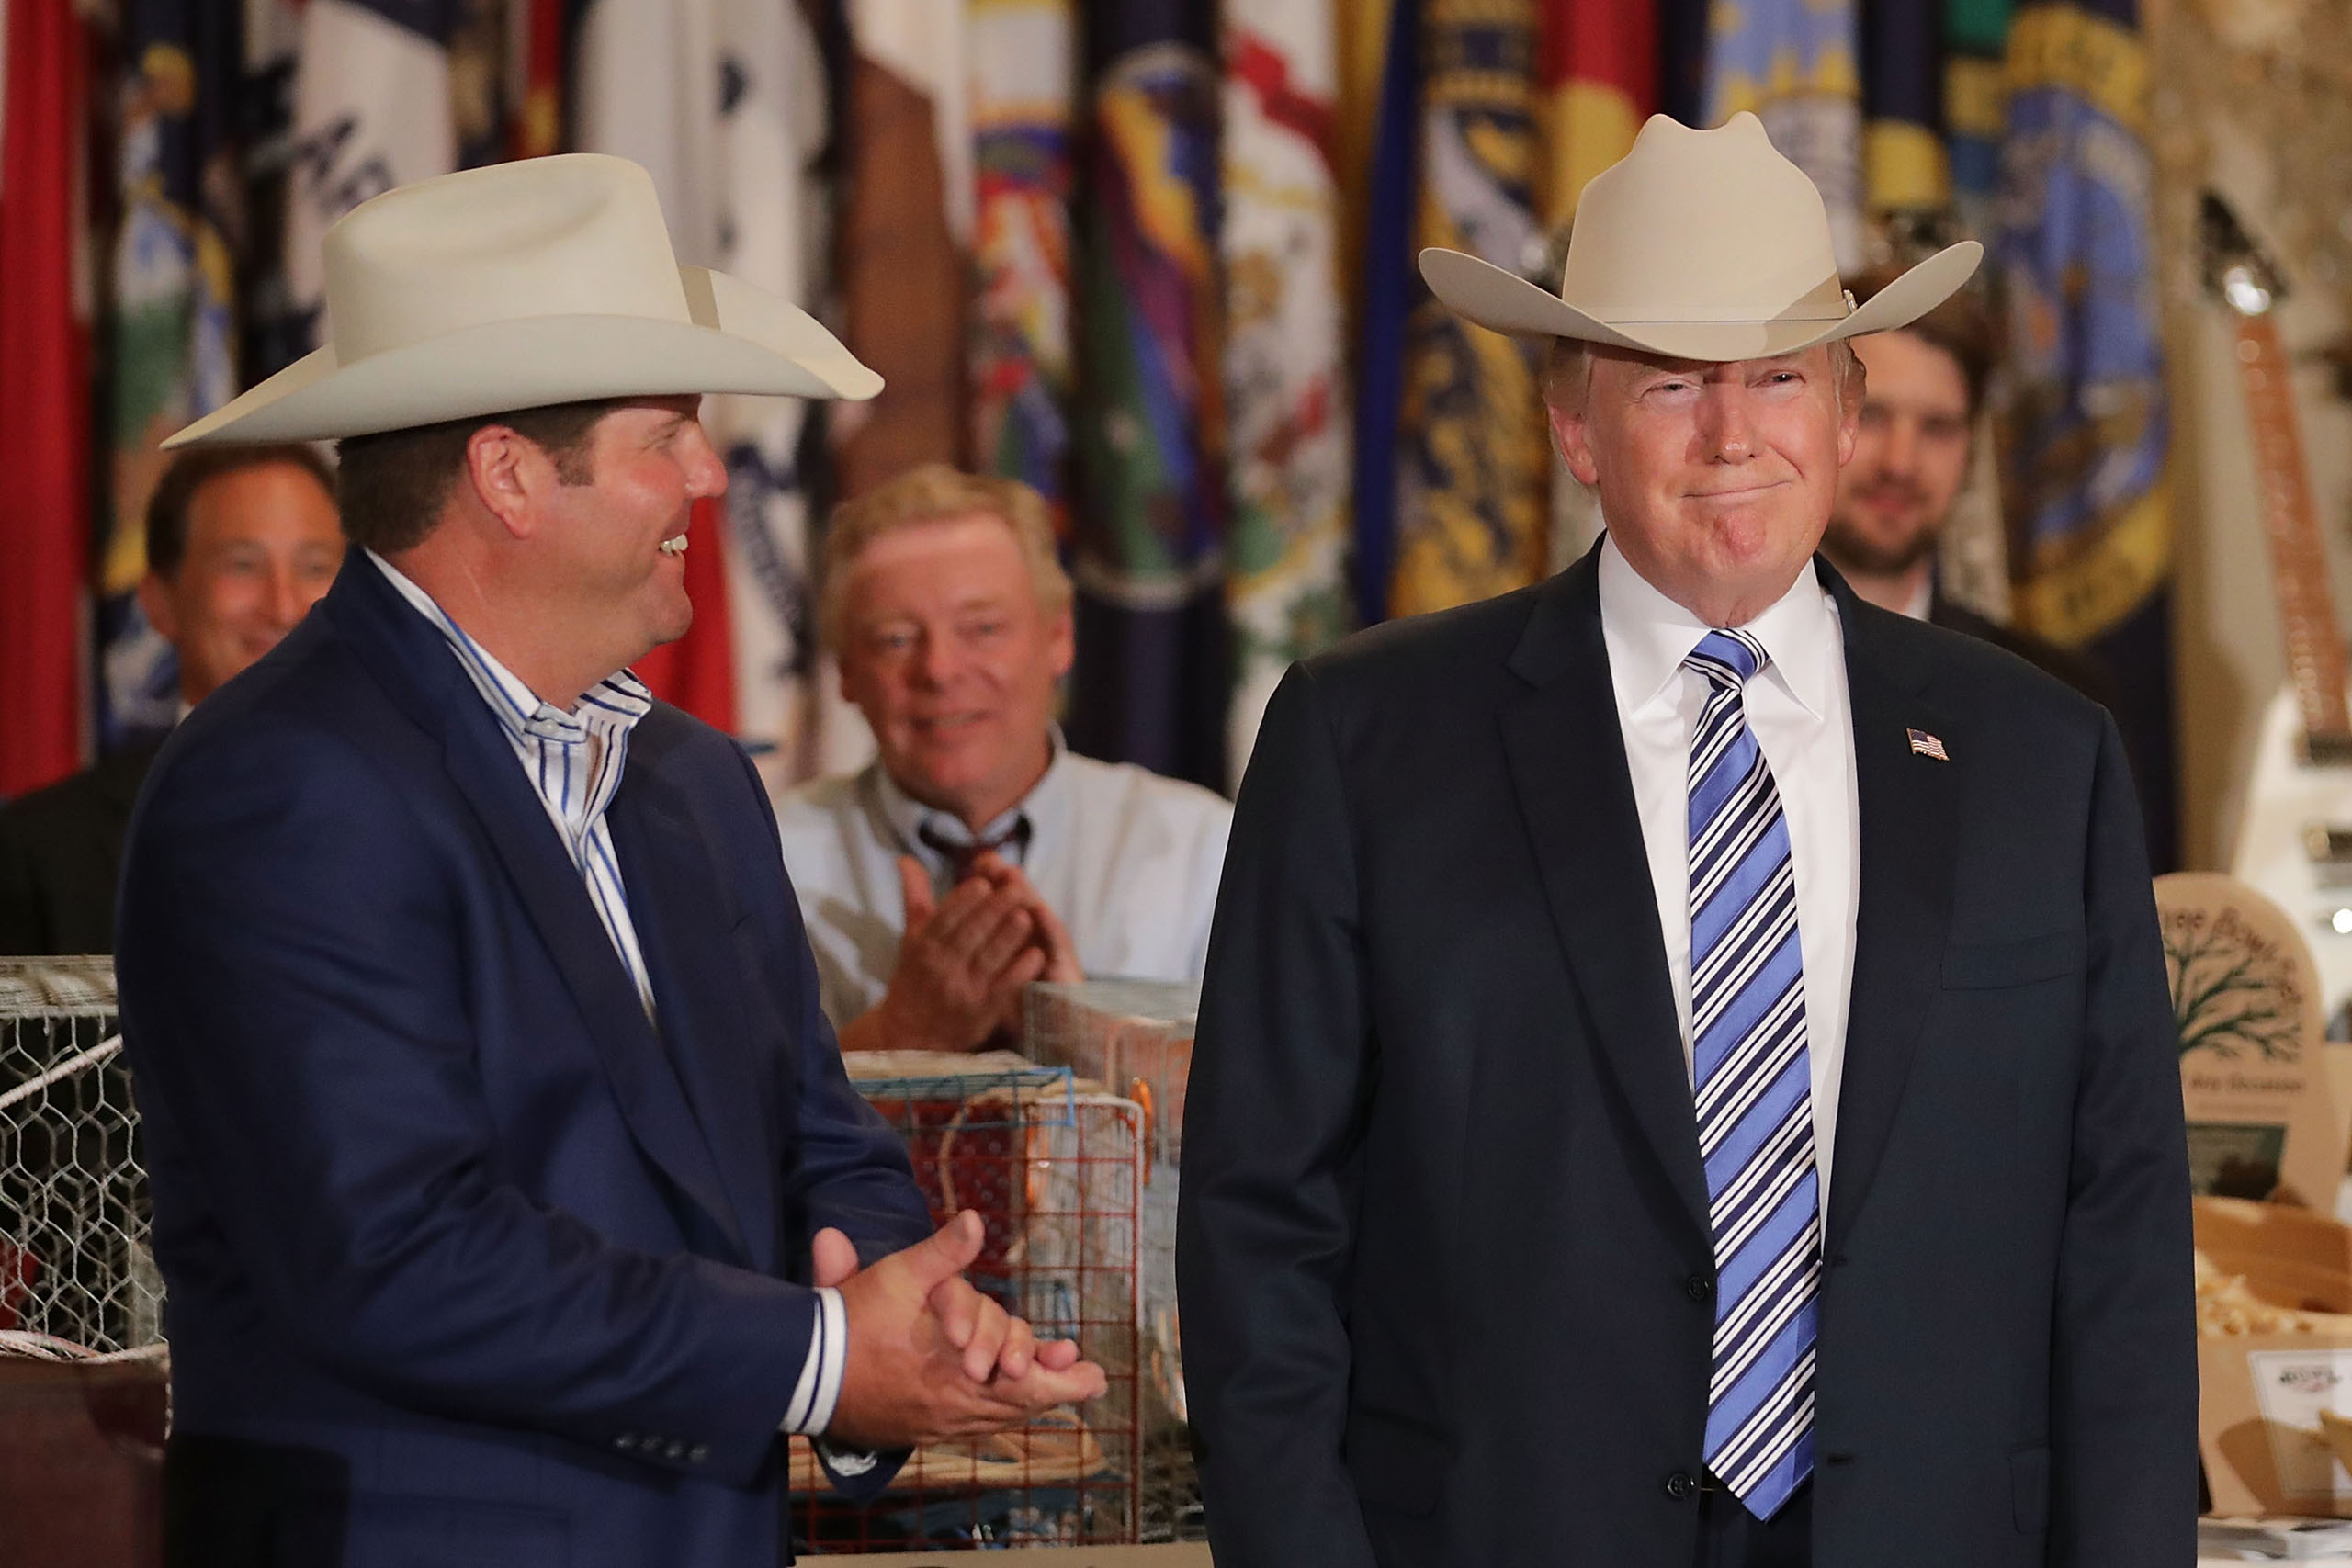 U.S. President Donald Trump wears a Stetson cowboy hat given to him by Dustin Noblitt (L) while touring a Made in America product showcase in the East Room of the White House July 17, 2017 in Washington, DC.